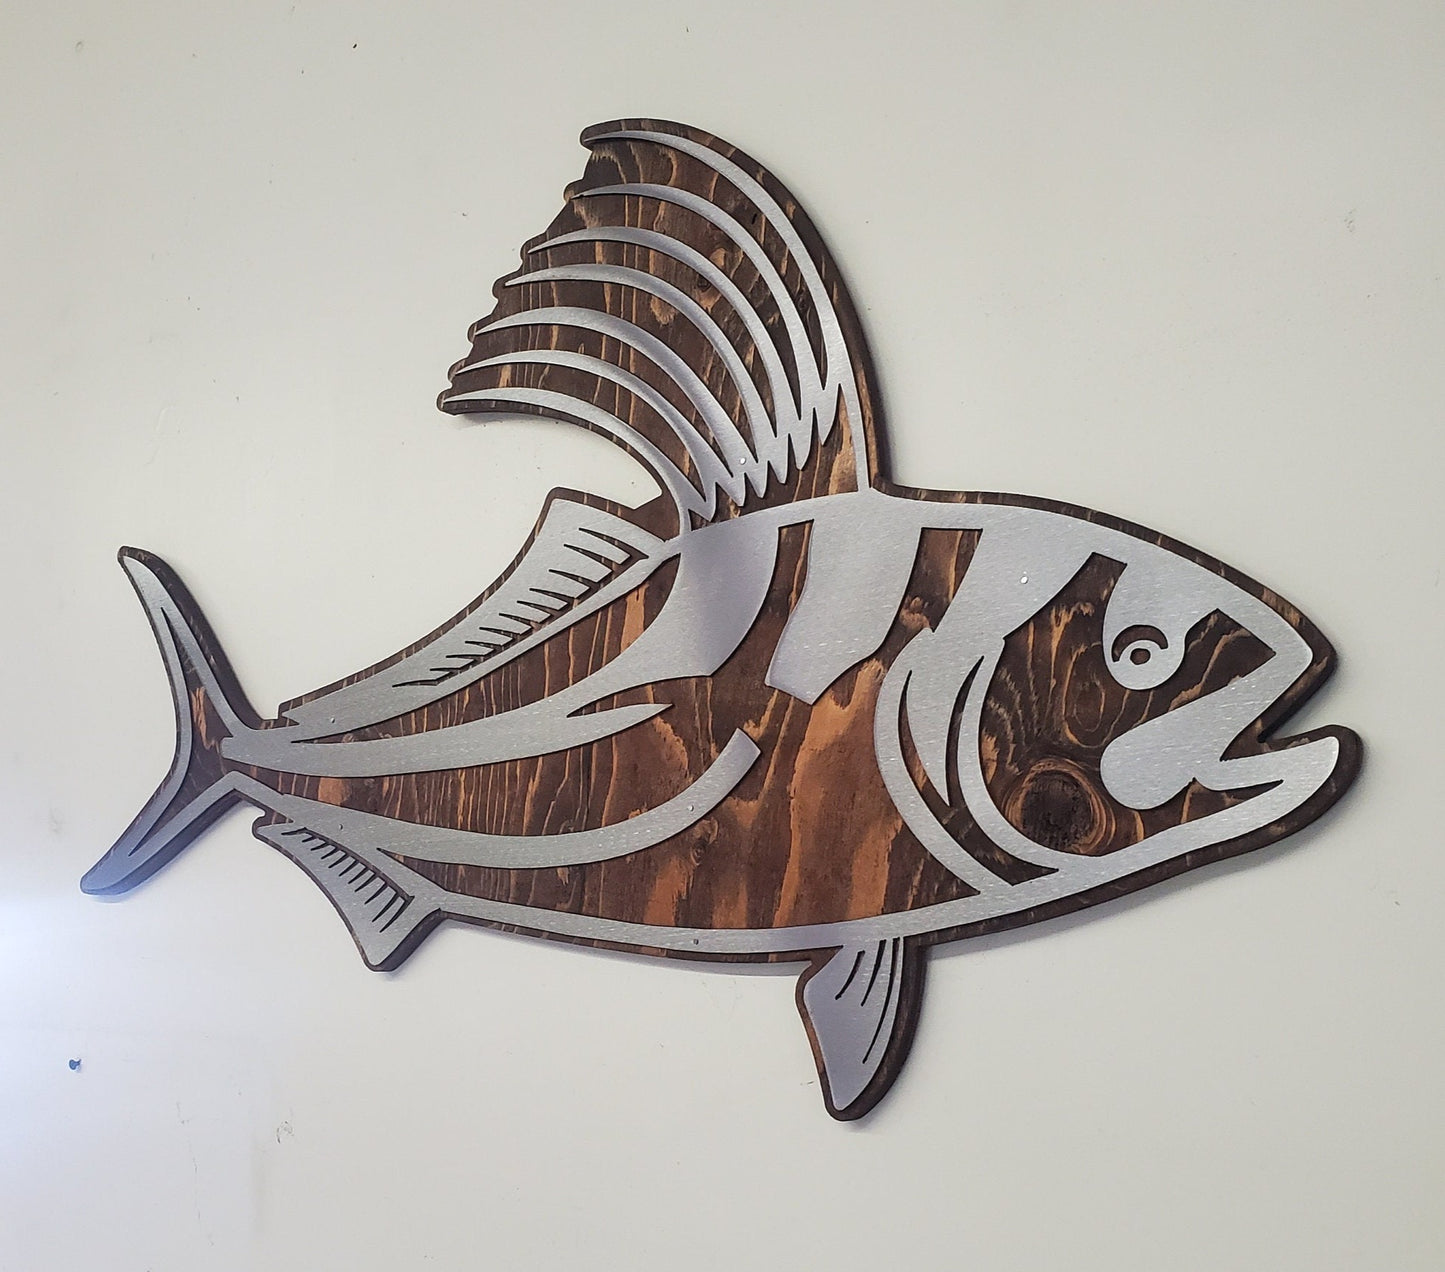 CNC cut metal rooster fish on a rustic stained wood background, handcrafted by a small family shop in Minnesota. The clear-coated steel rooster fish has intricate details and is designed for indoor or covered outdoor display